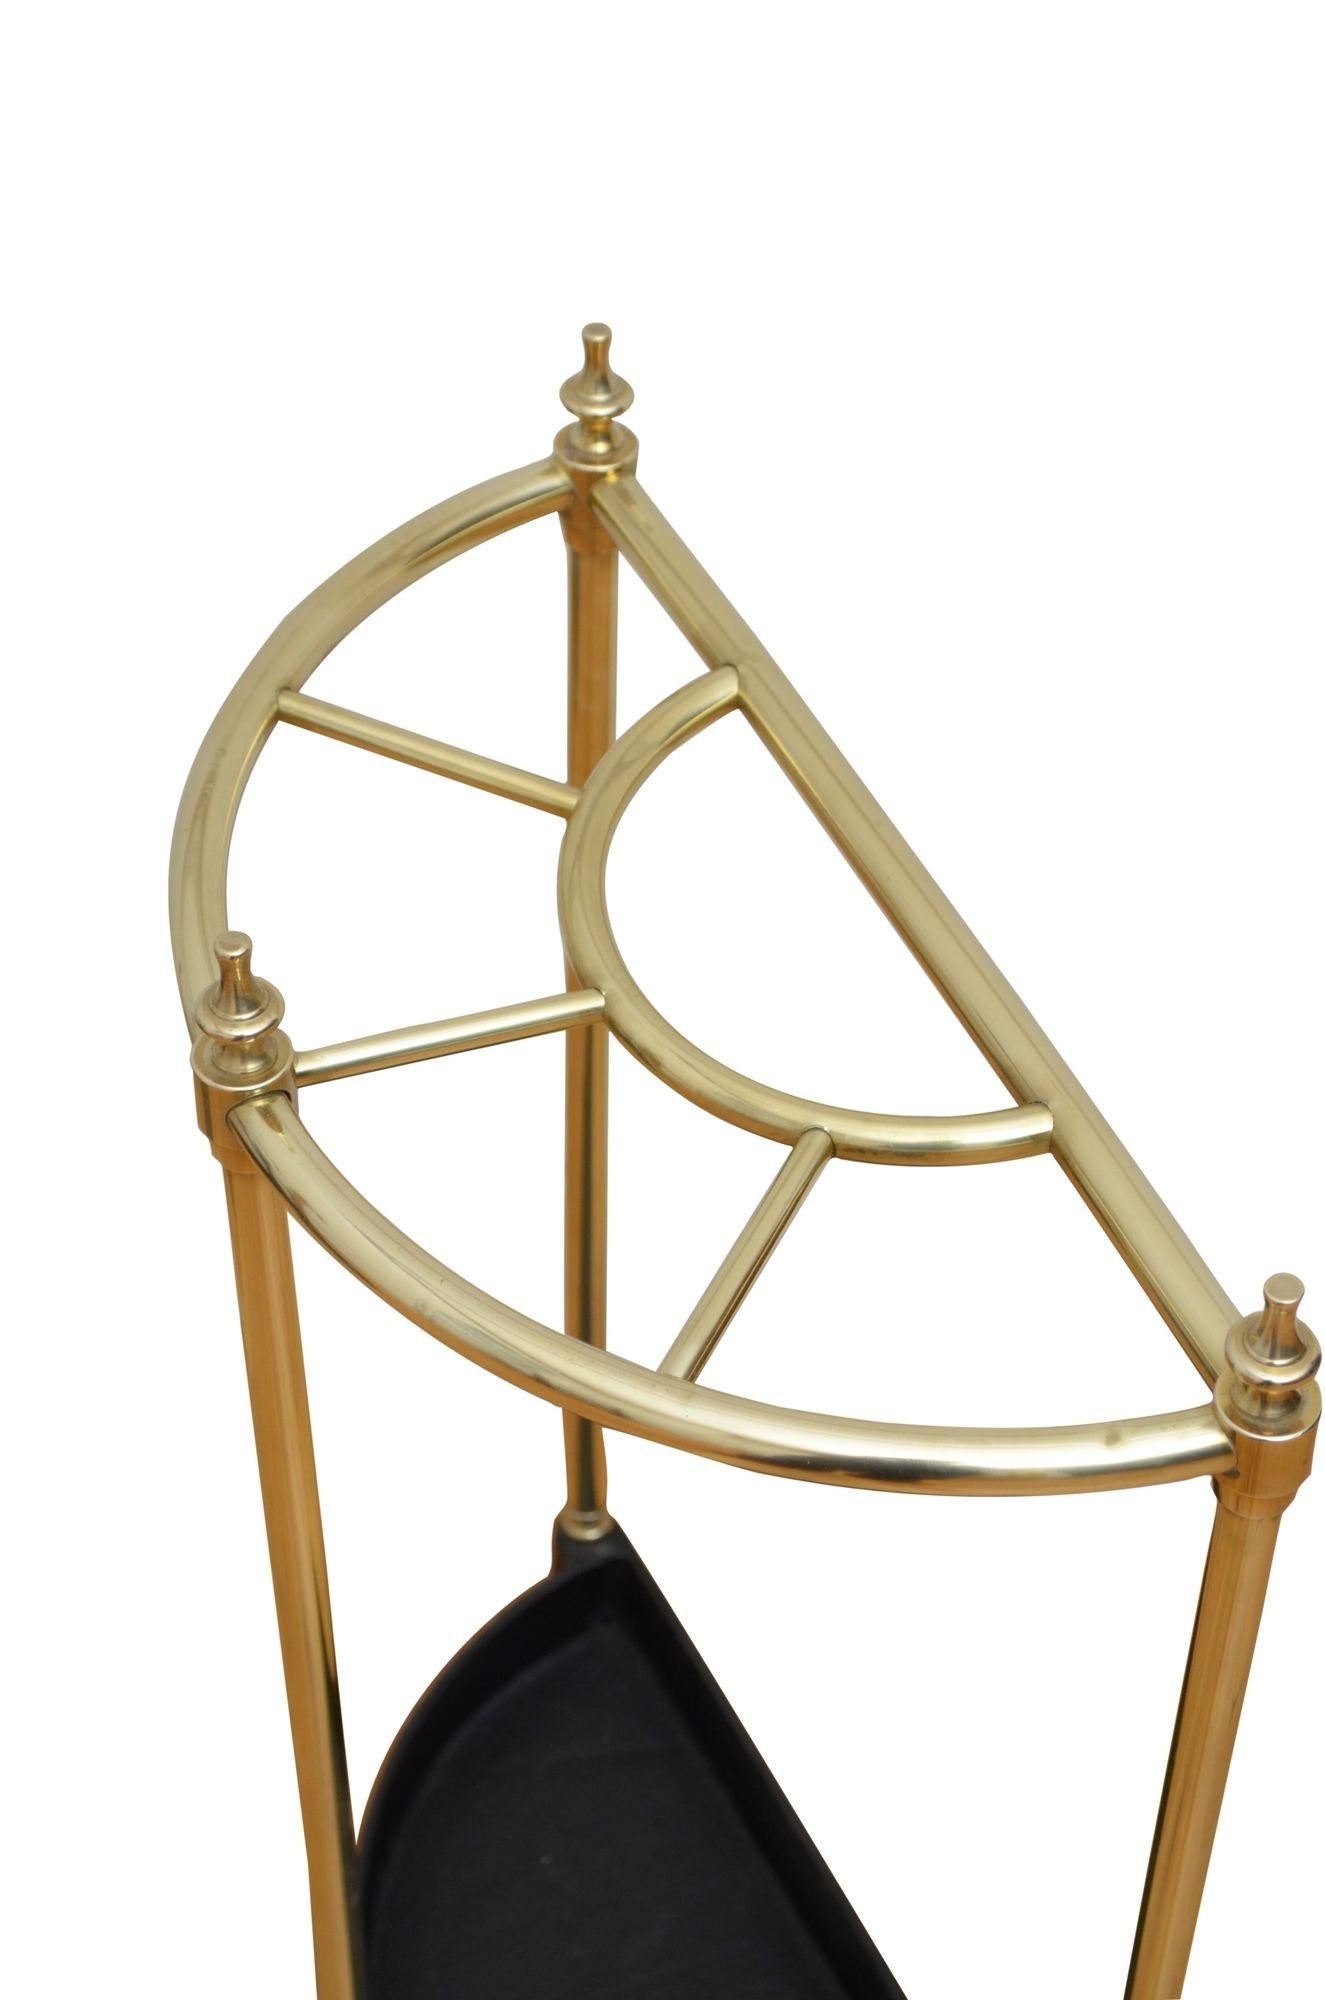 P0256  English half moon umbrella stand in brass, having five divisions with decorative finials and black drip tray raised on brass ball feet.. This umbrella stand has been cleaned and polished and is in home ready condition. c1960
Free delivery UK